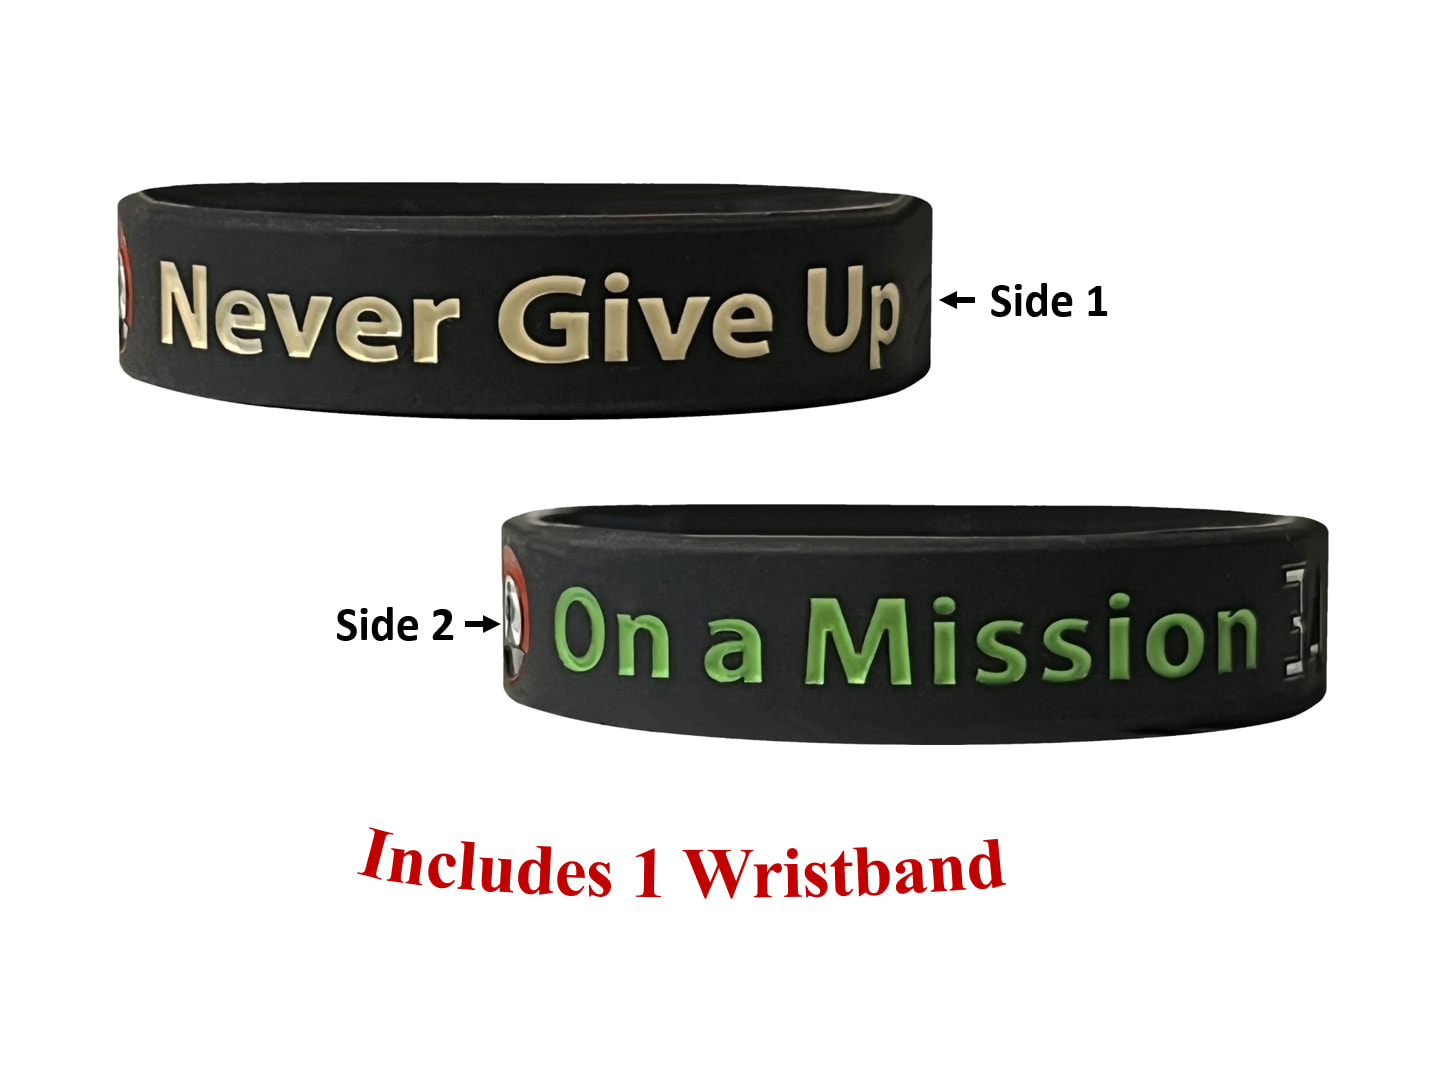 Rubber Inspirational Quote Bracelets Unisex for Men Women Teens Black Pride Movement Equality Peace Justice AMPM Collective Silicone Motivational Wristbands 6/12/24 